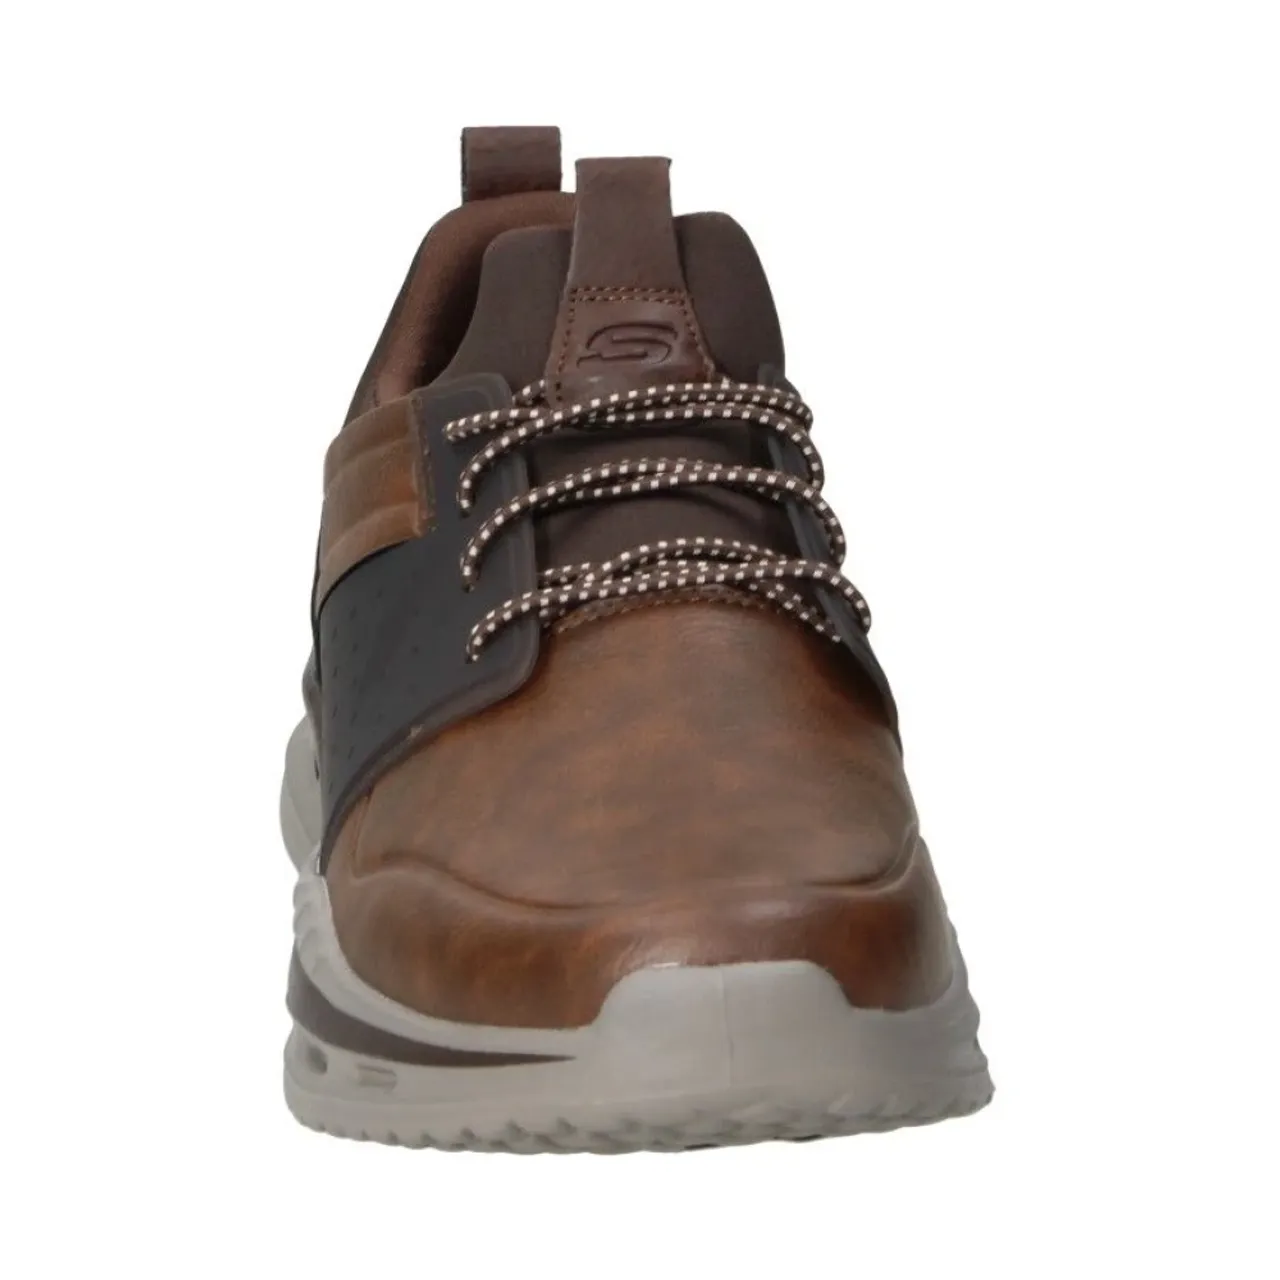 Skechers , Shoes ,Brown male, Sizes: